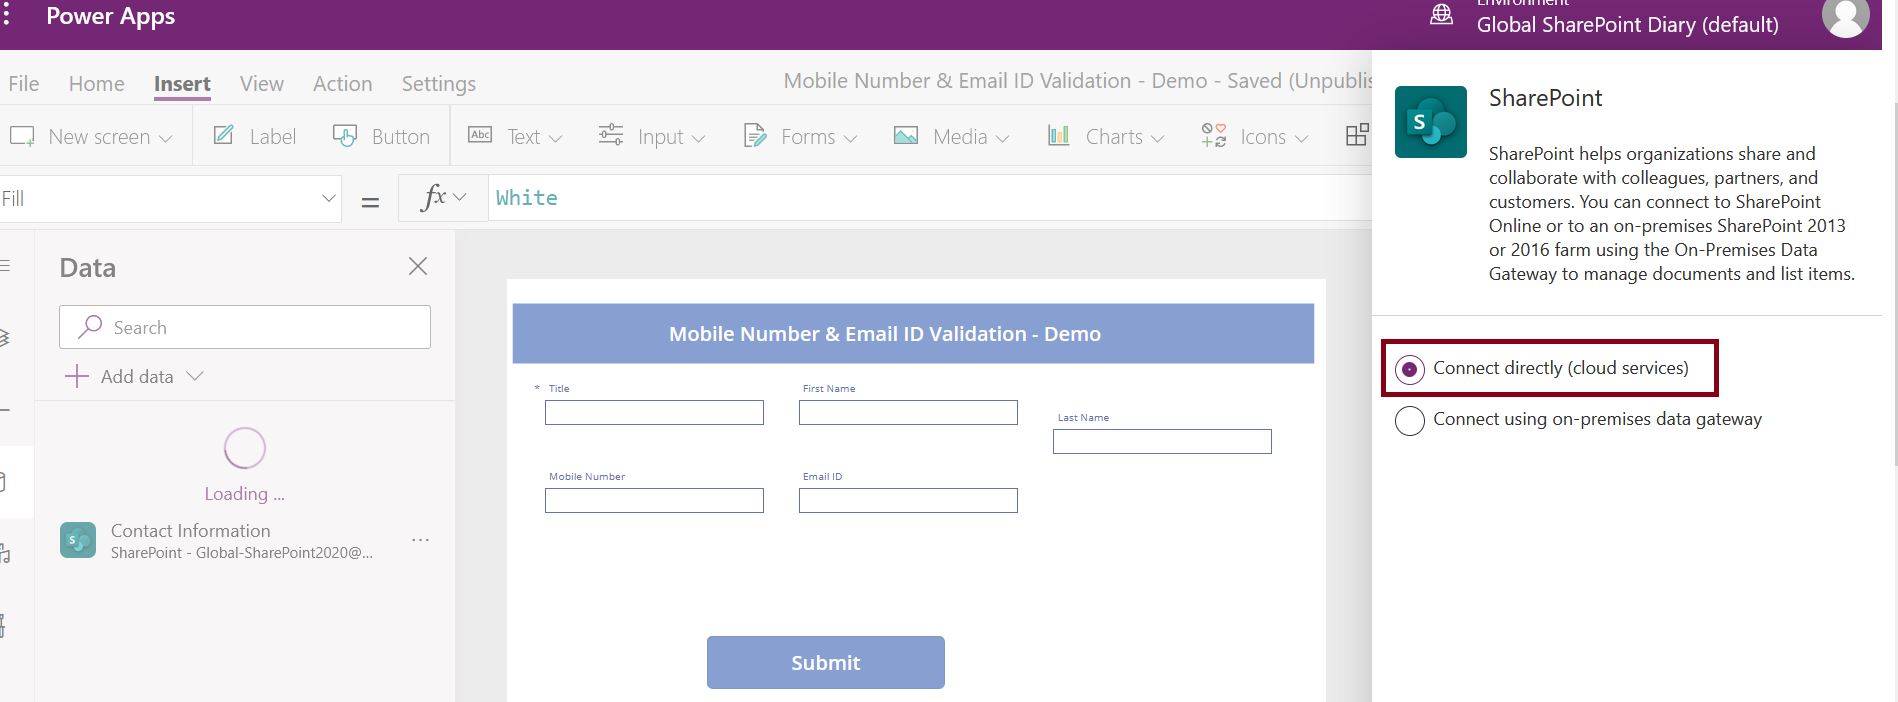 Connect directly (cloud services) in PowerApps